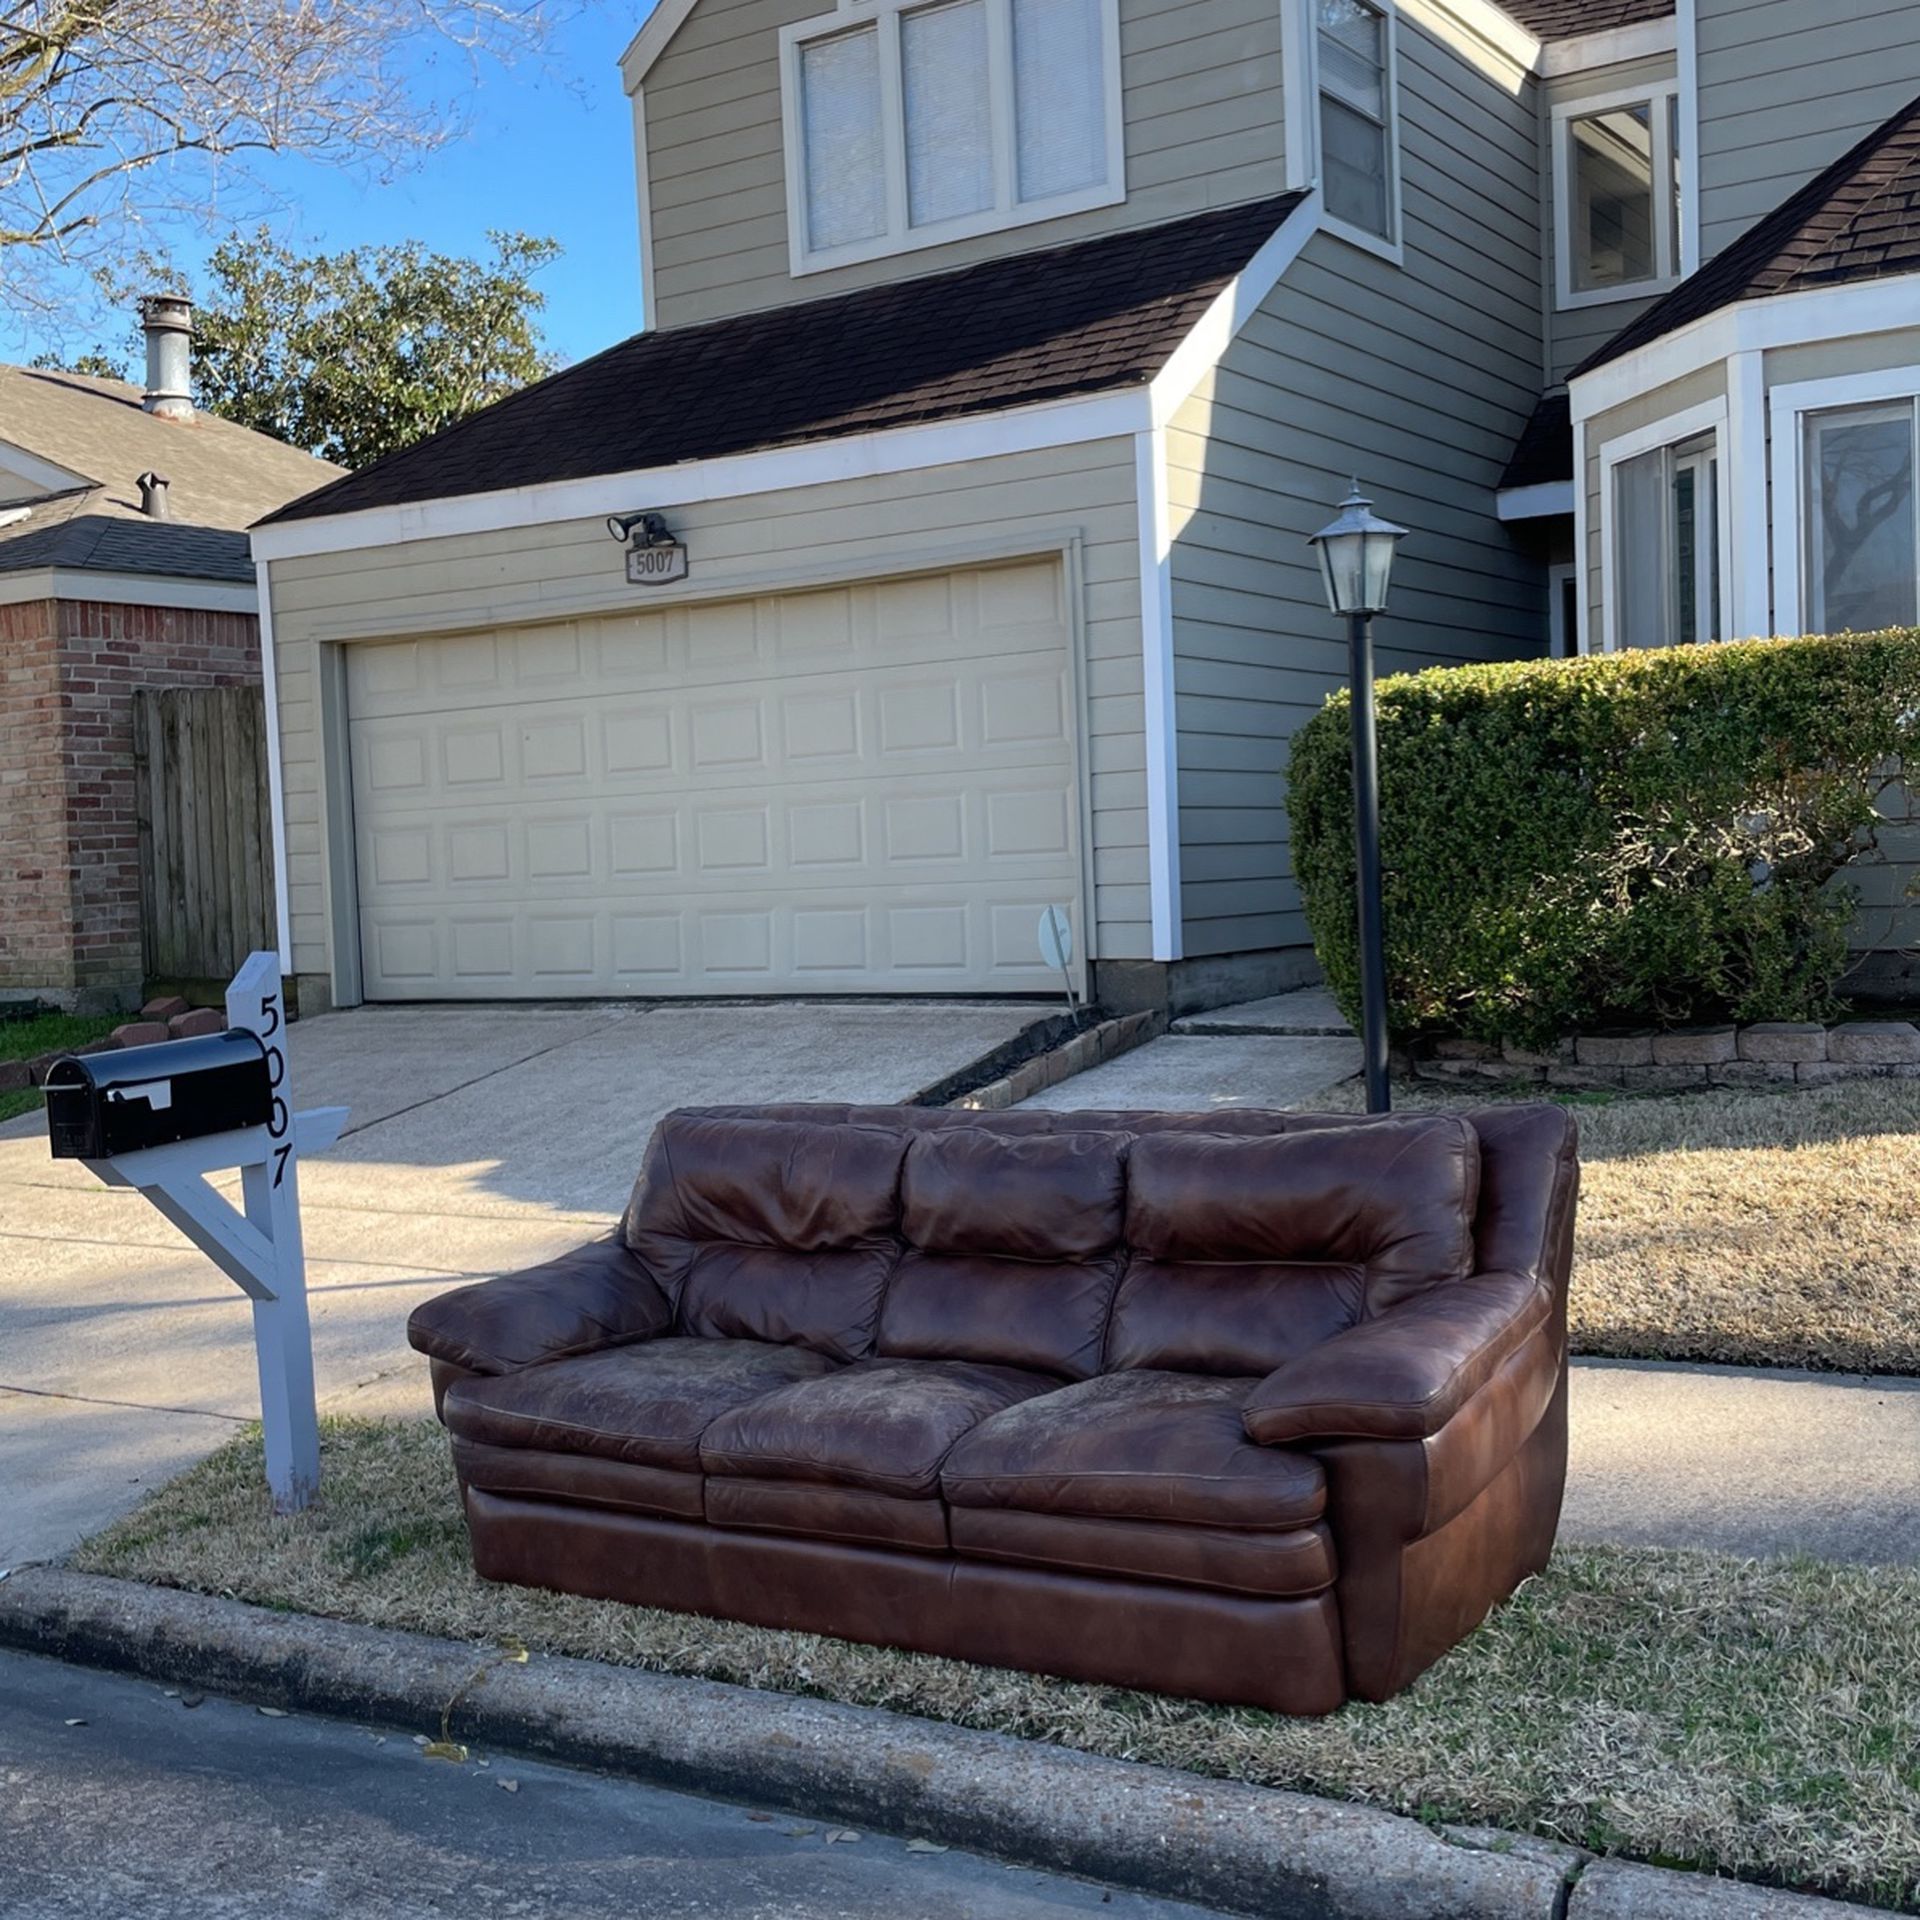 FREE COUCH!!!